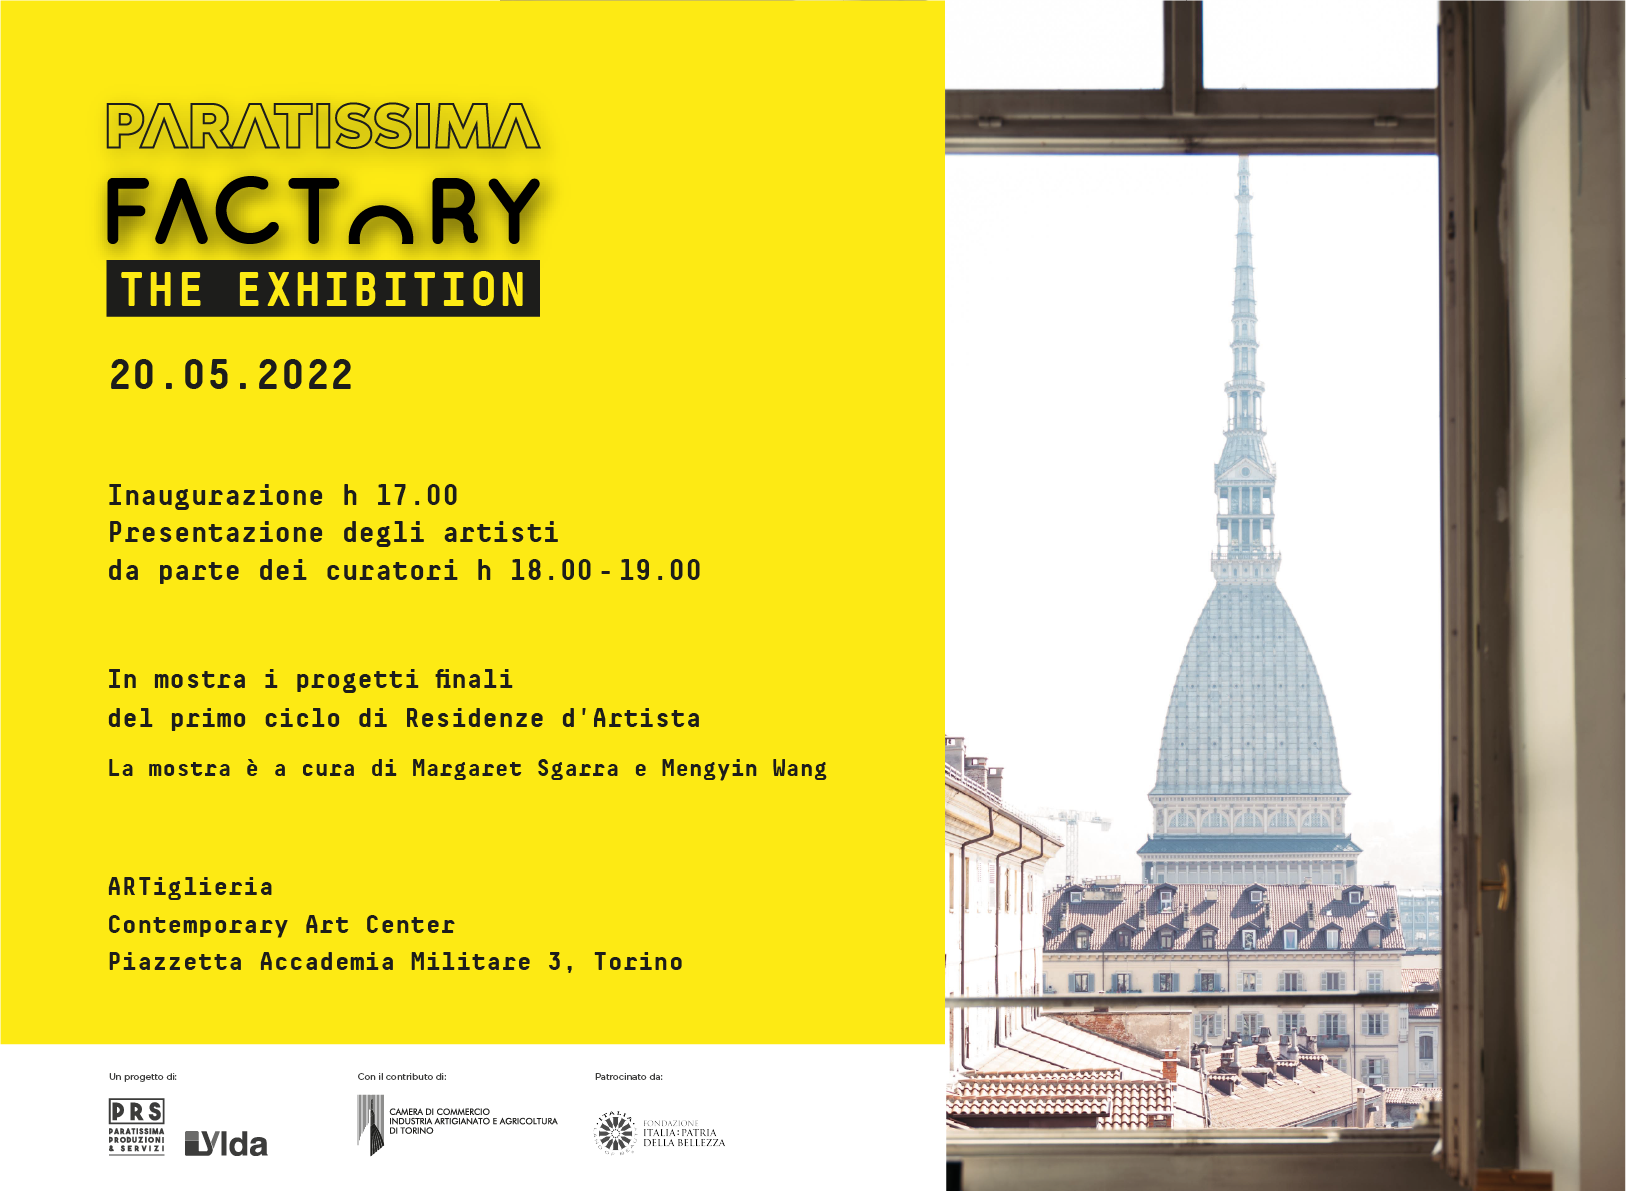 Paratissima Factory - The Exhibition